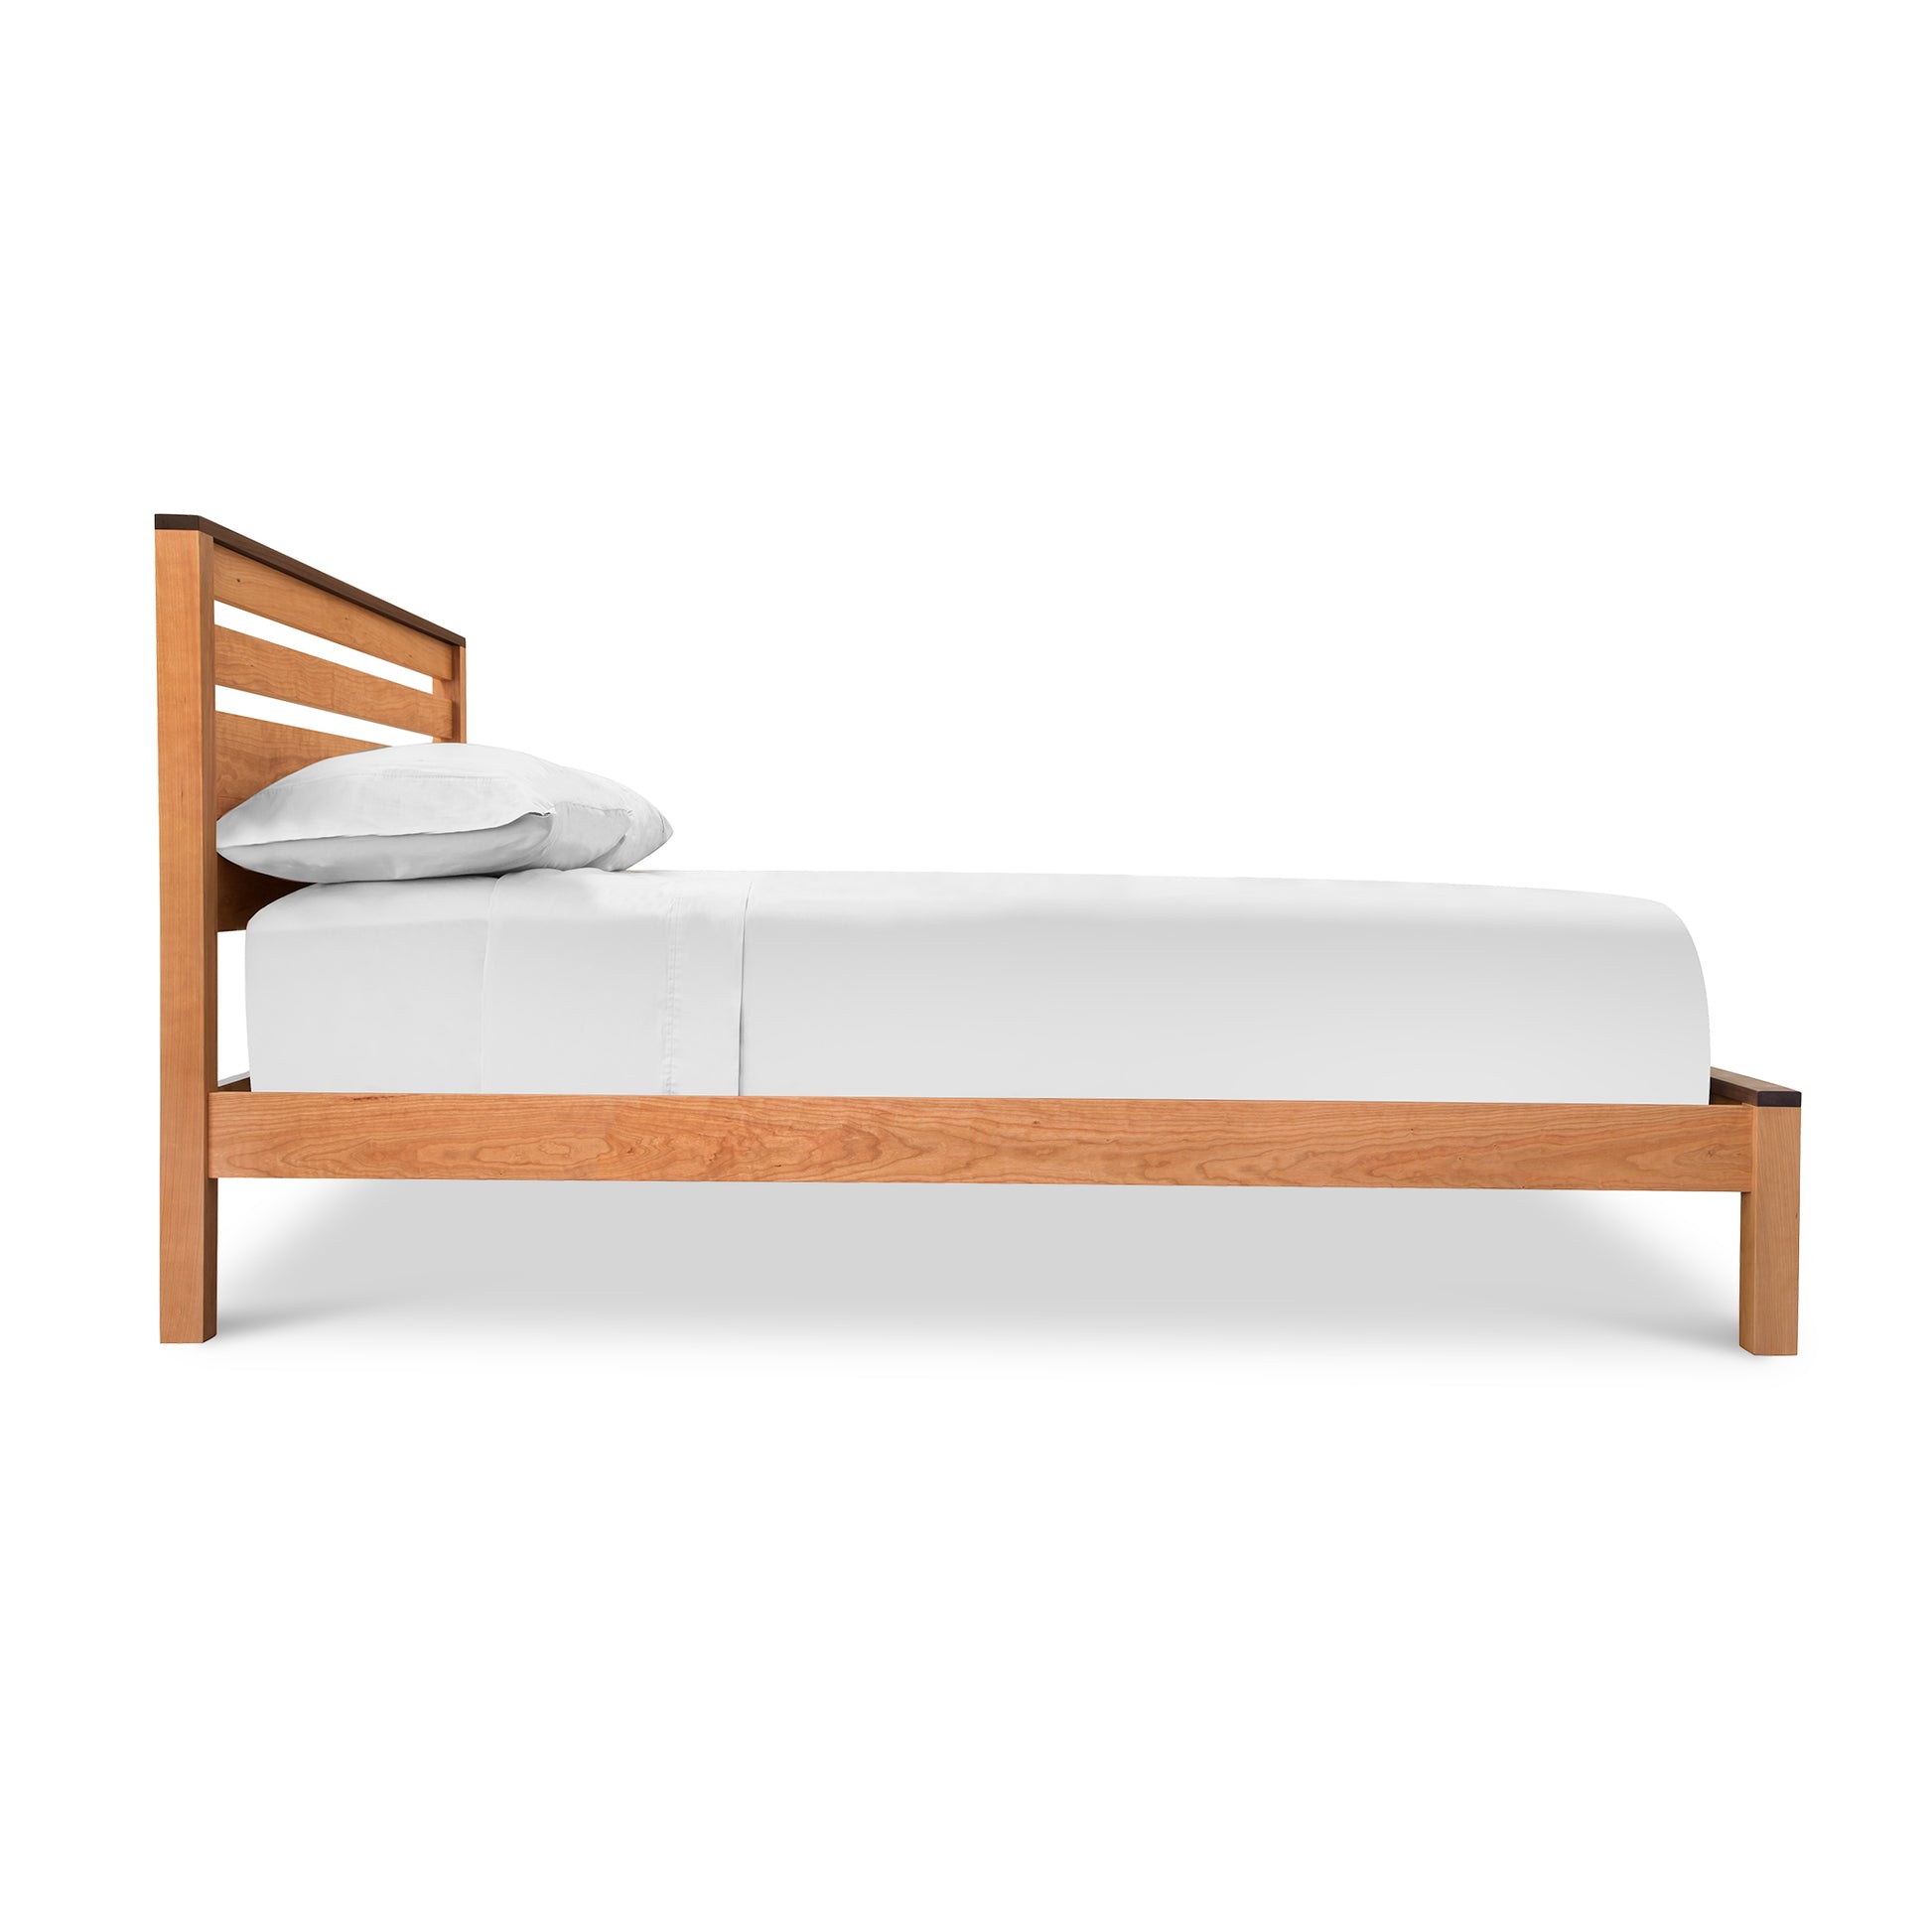 A single Skyline Panel Bed made of solid Cherry wood by Vermont Furniture Designs with an eco-friendly white mattress cover and a pillow against a white background.